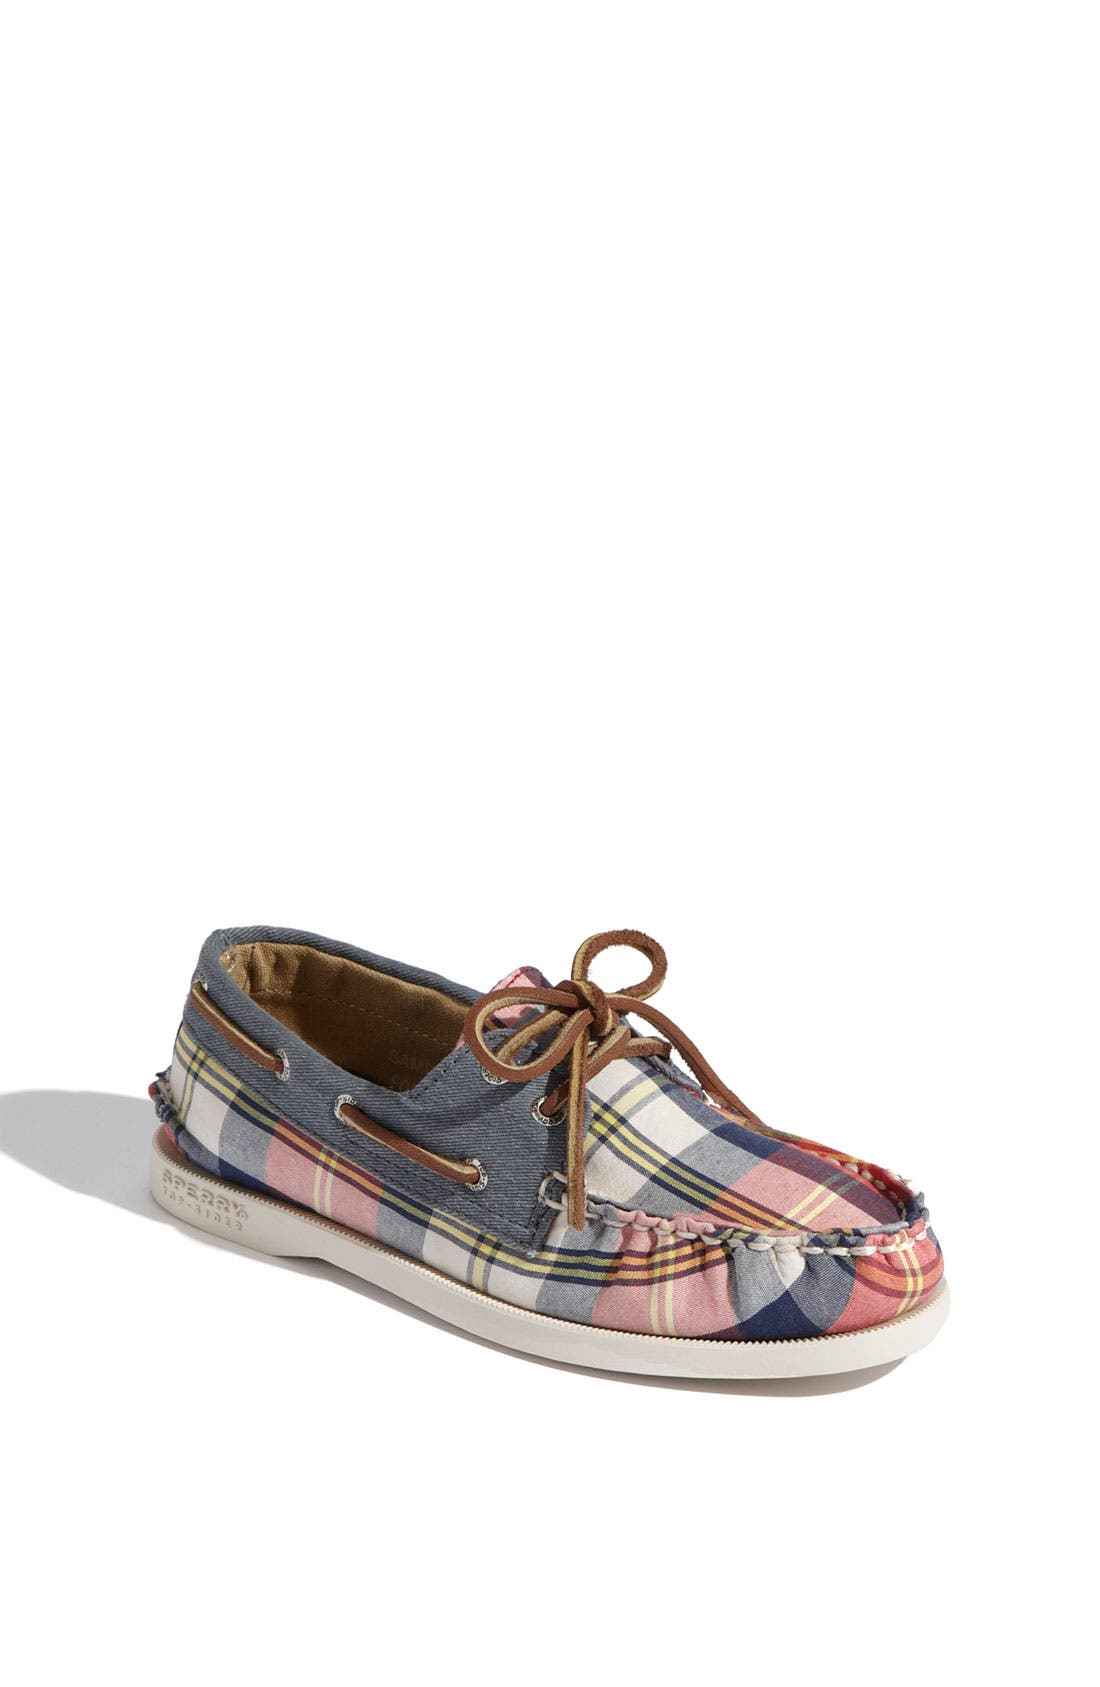 sperry top sider plaid